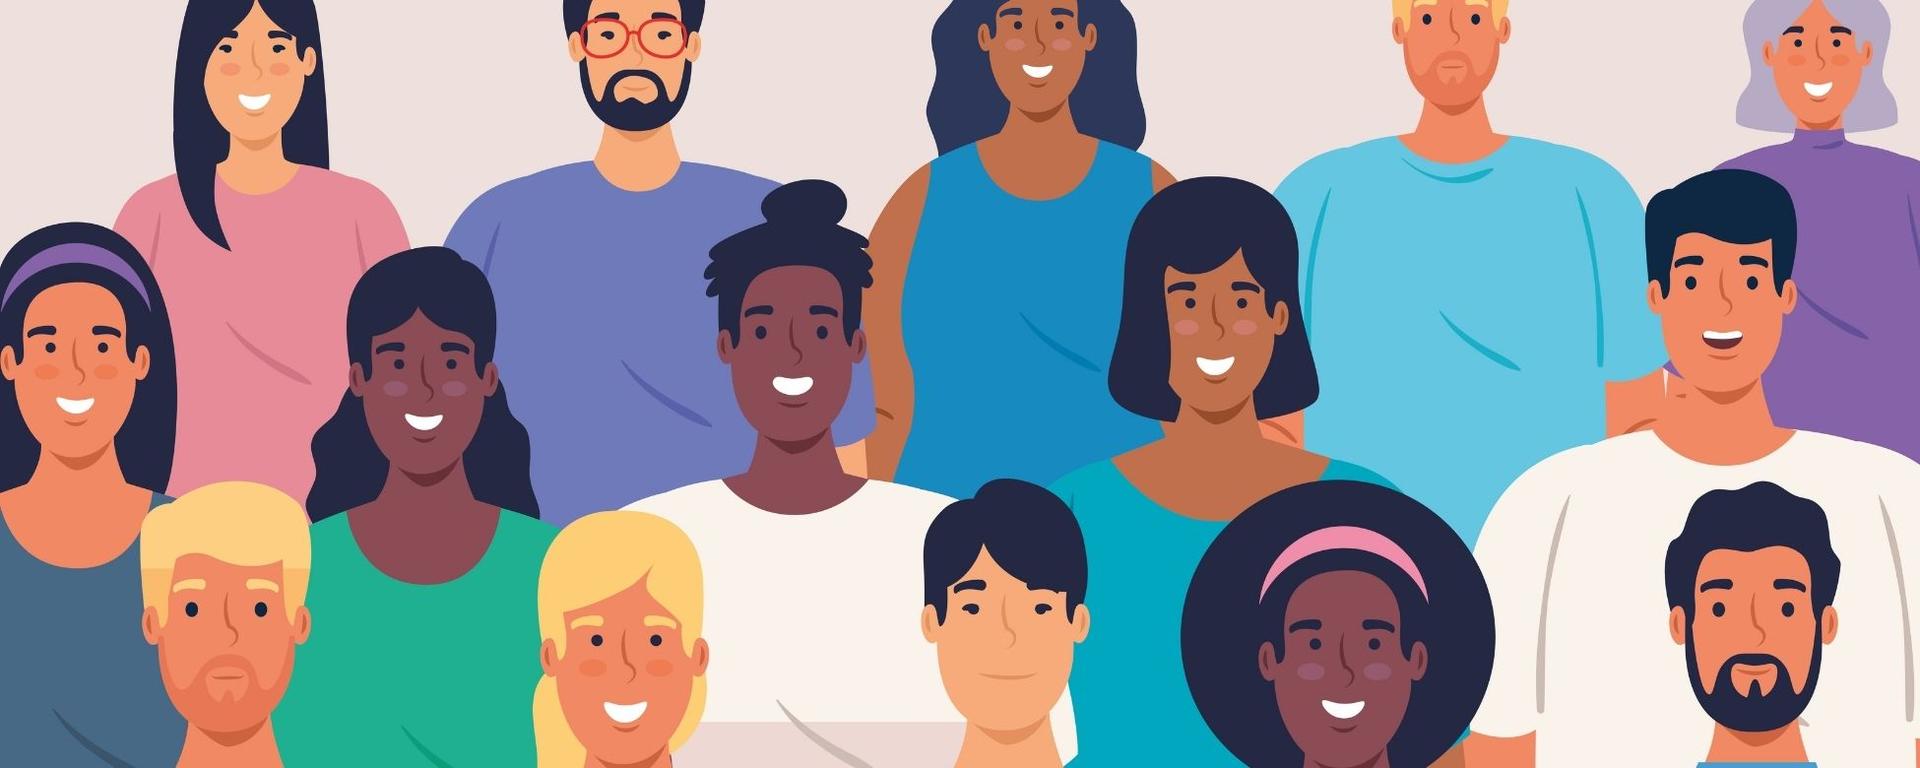 illustrated group of diverse people